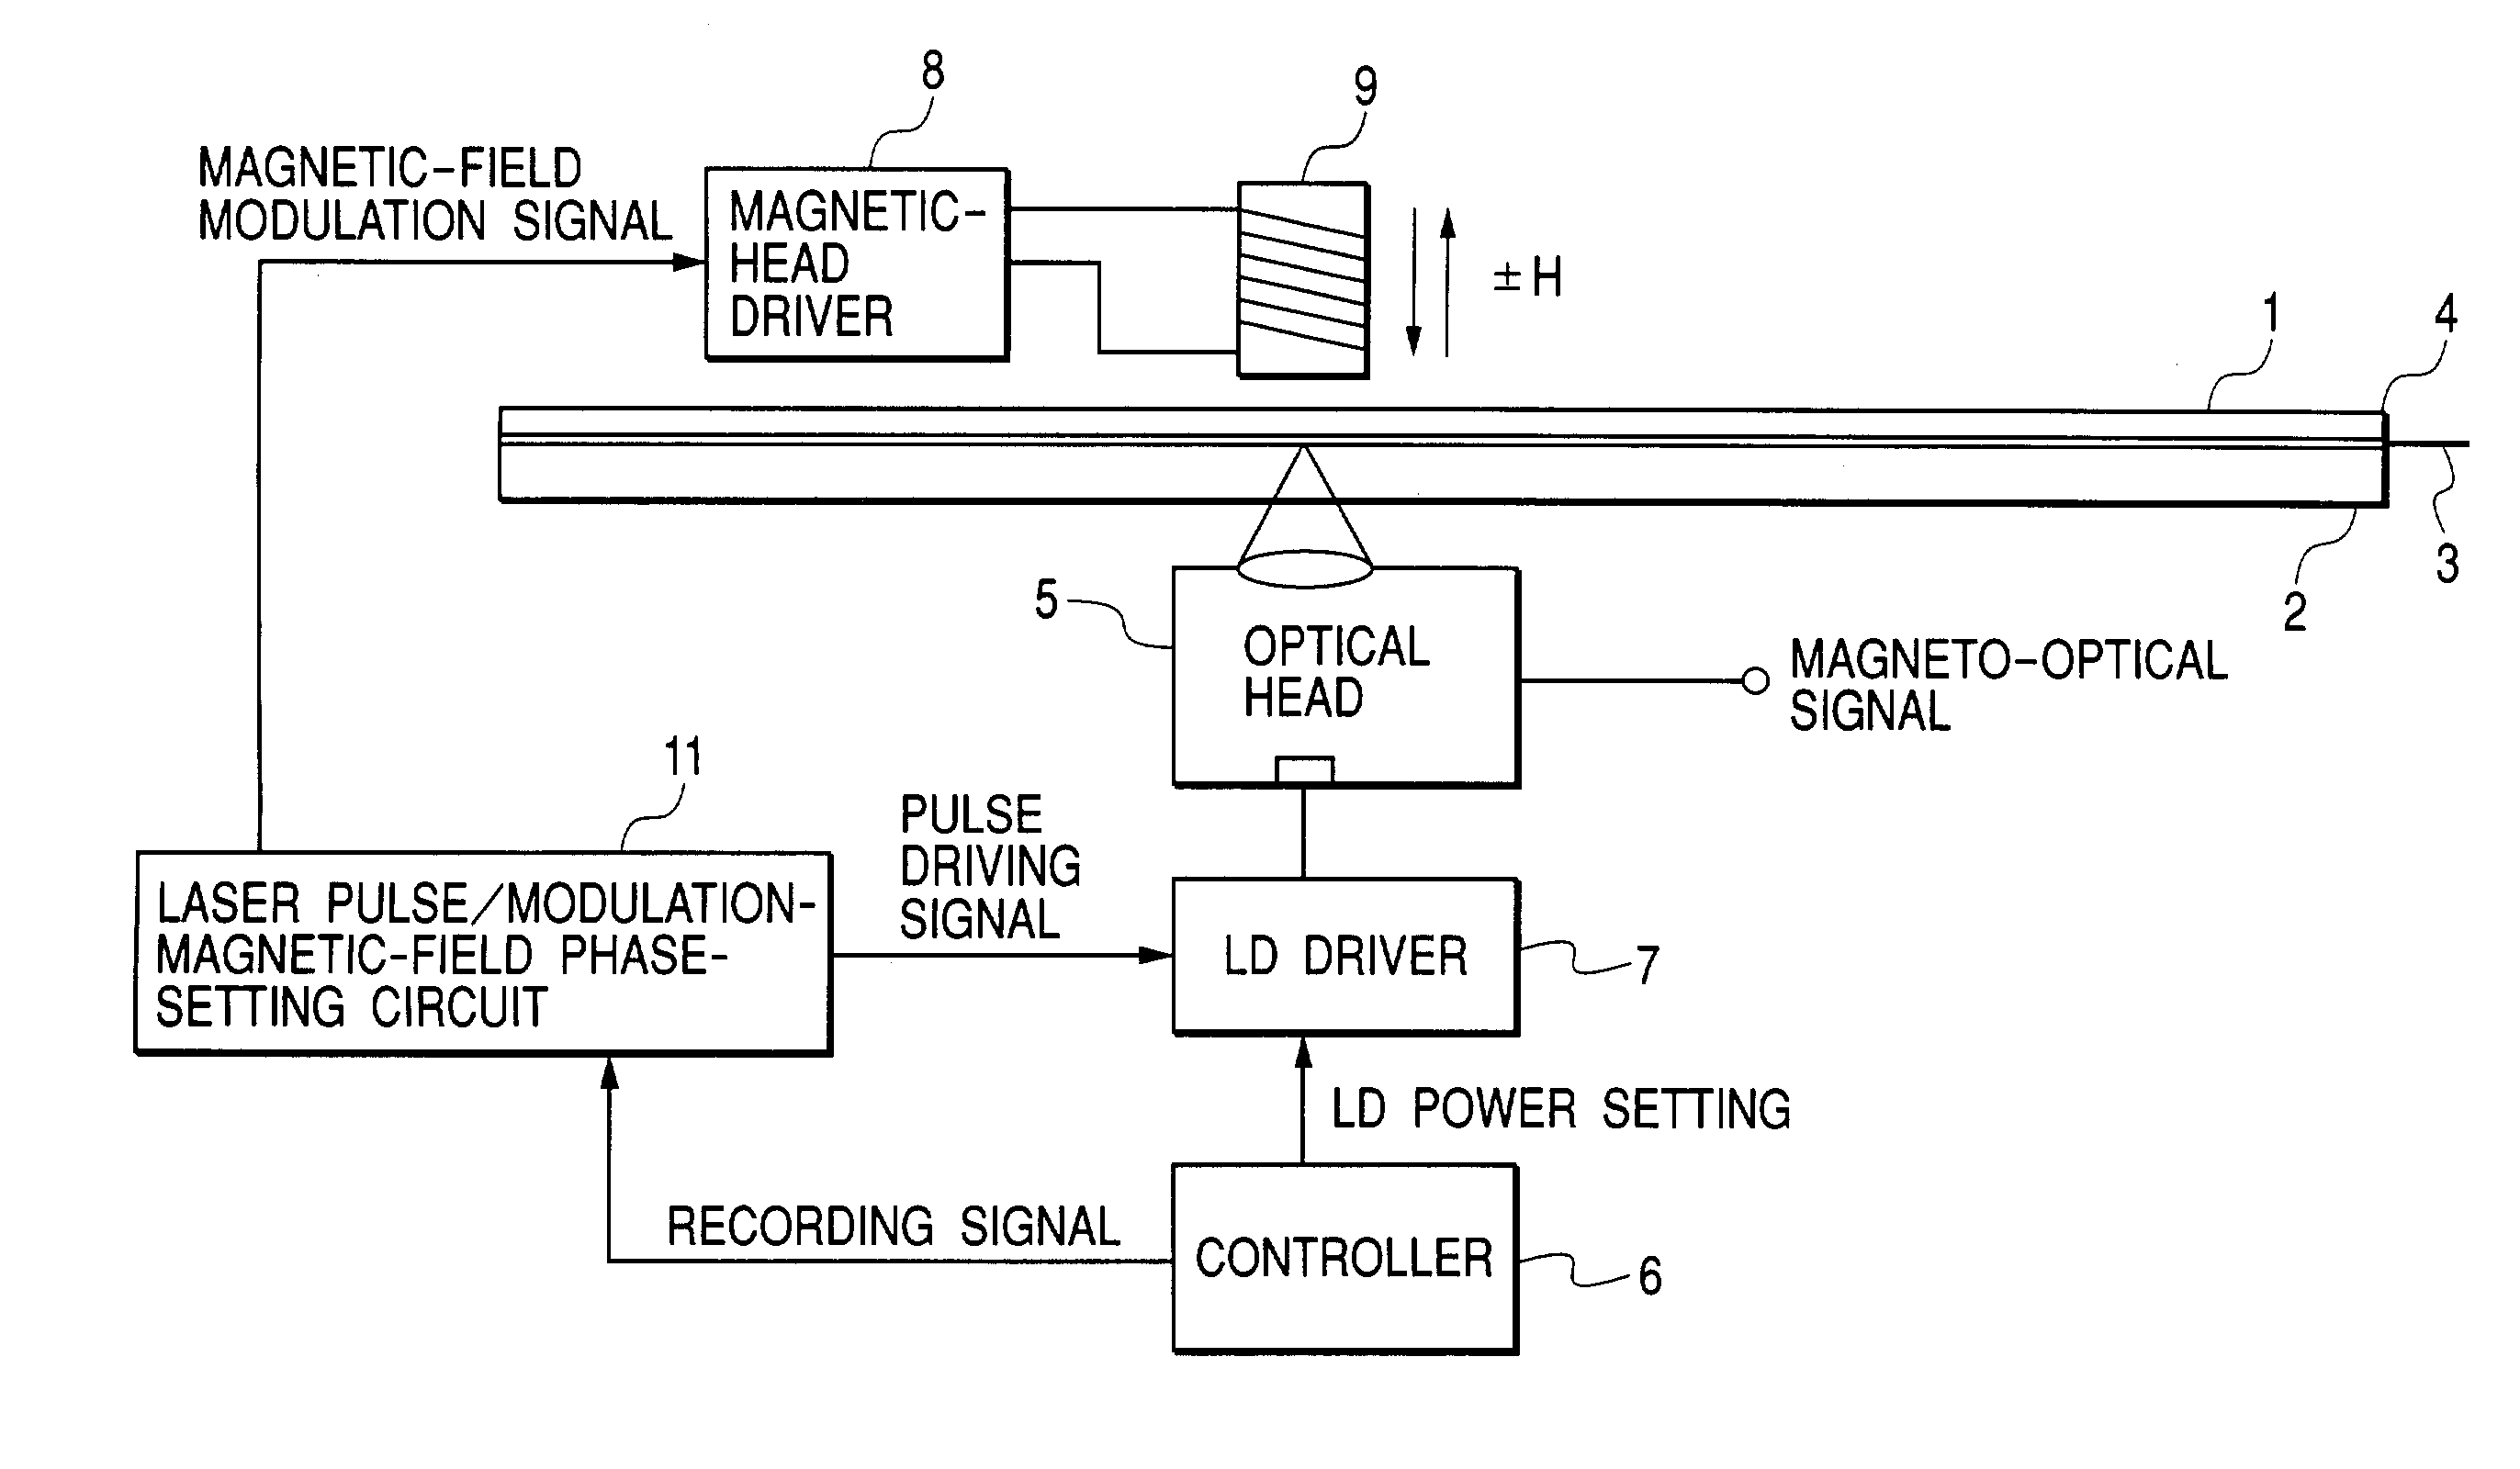 Magneto-optical recording device capable of setting the time phase of laser pulses and magnetic fields